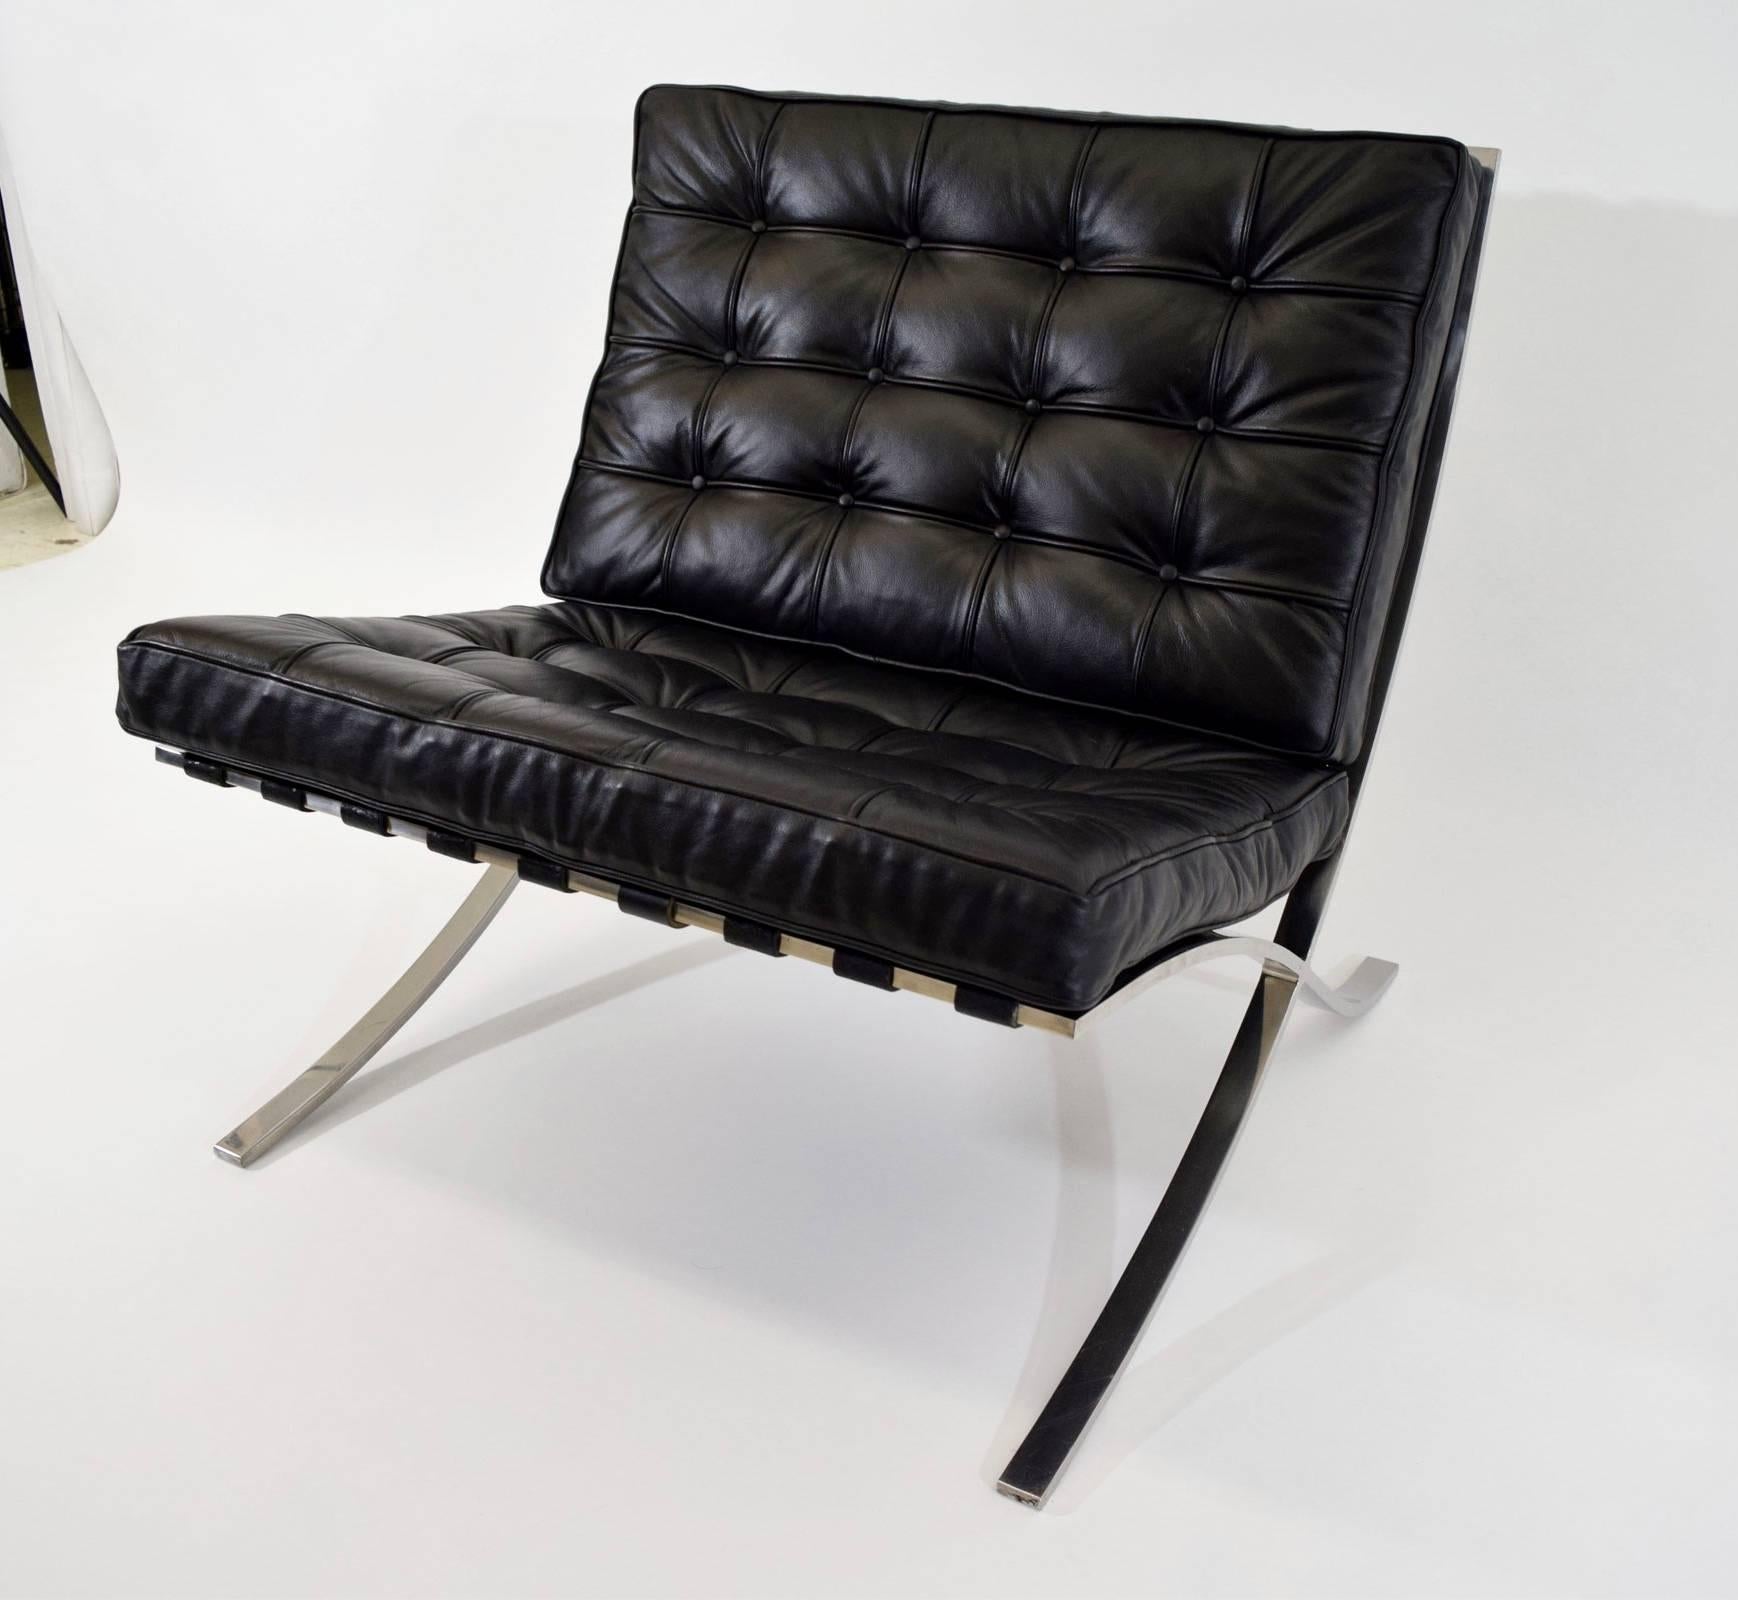 Vintage Barcelona chair by Mies van der Rohe in stainless steel and leather.